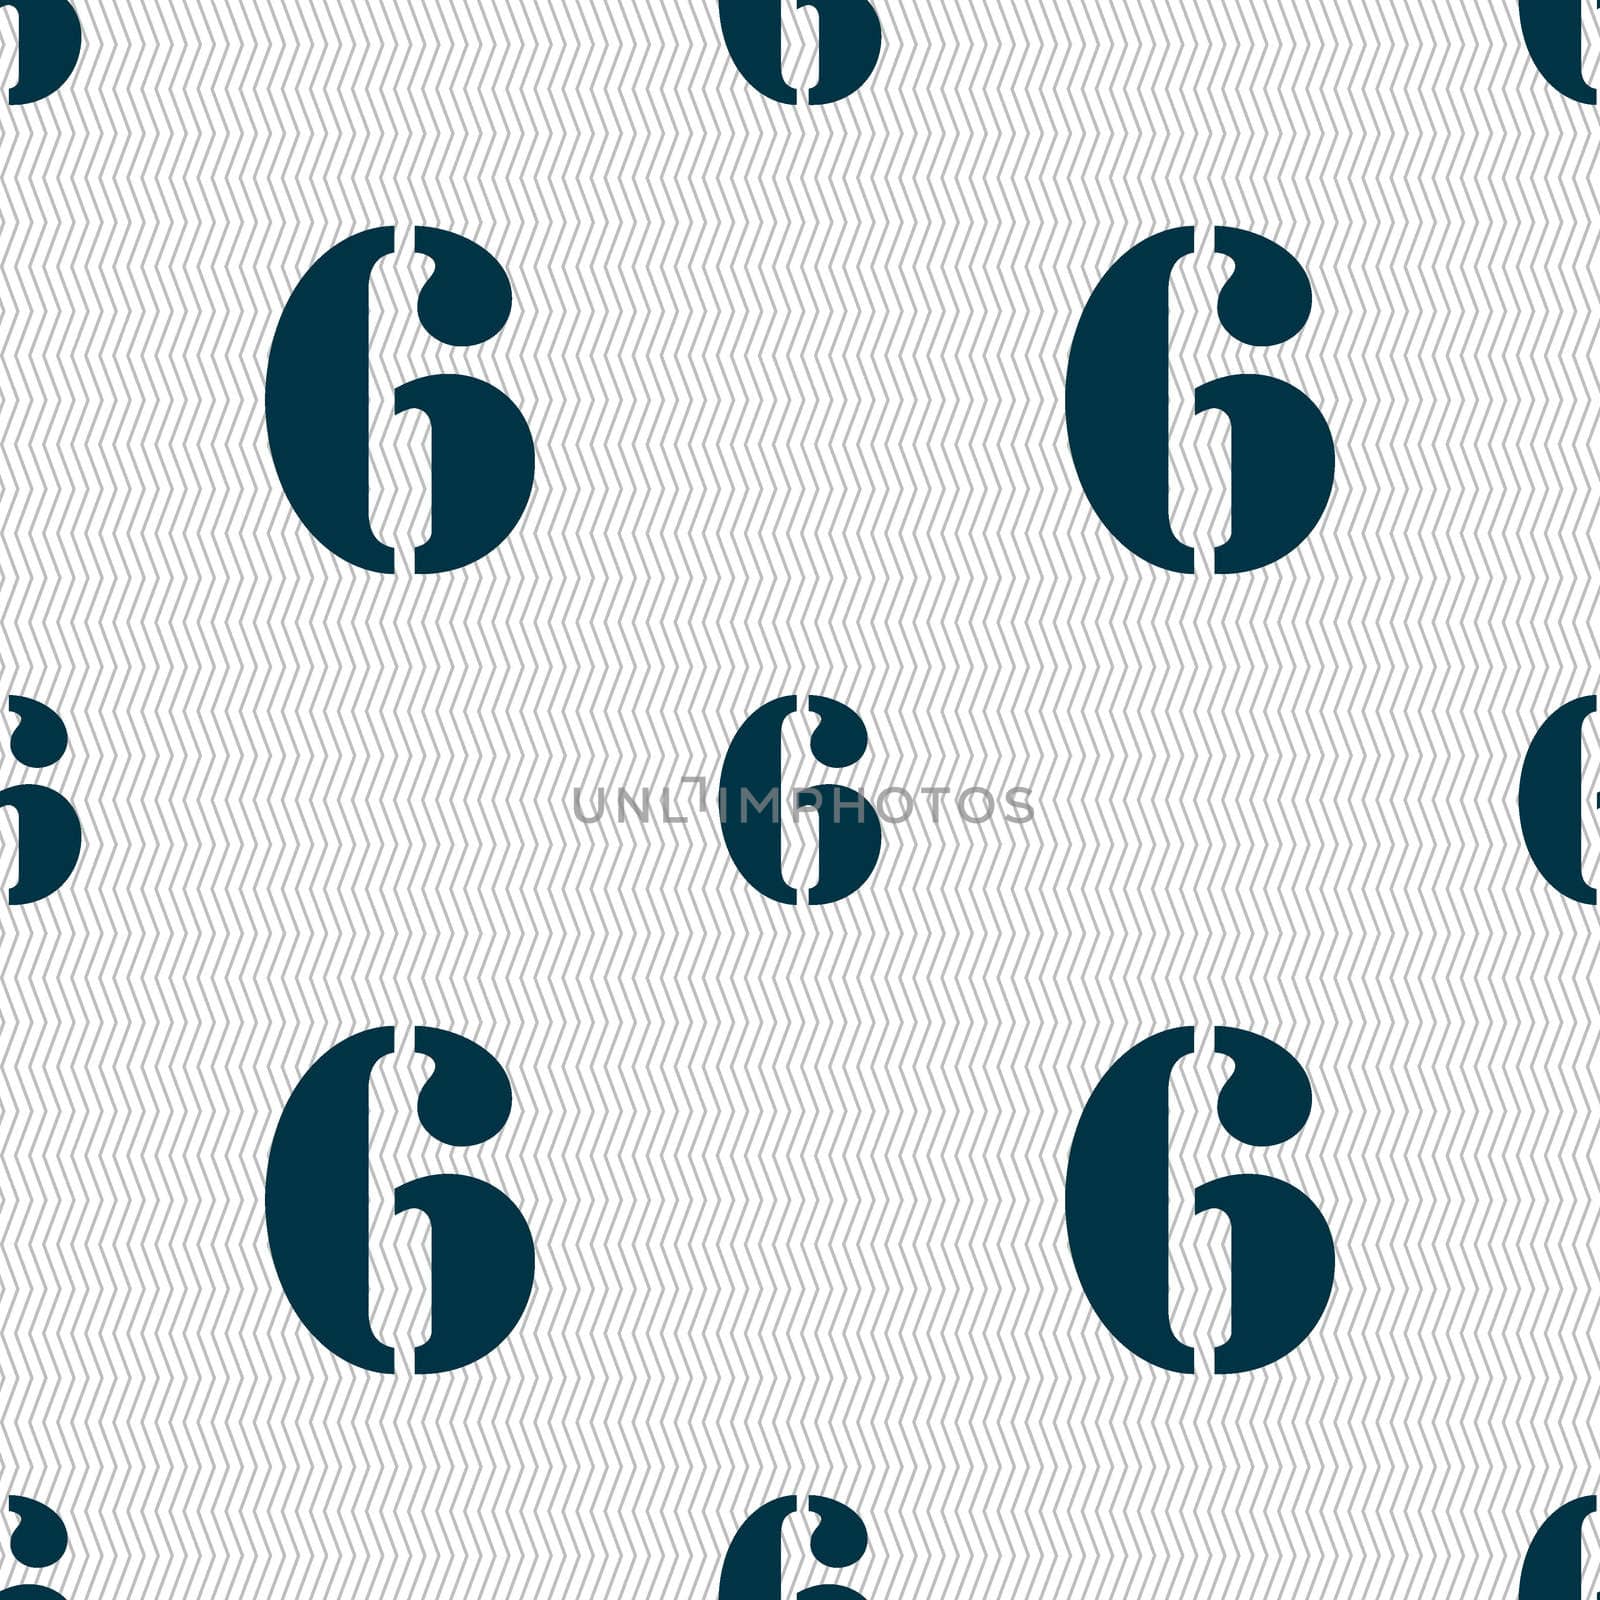 number six icon sign. Seamless abstract background with geometric shapes. illustration